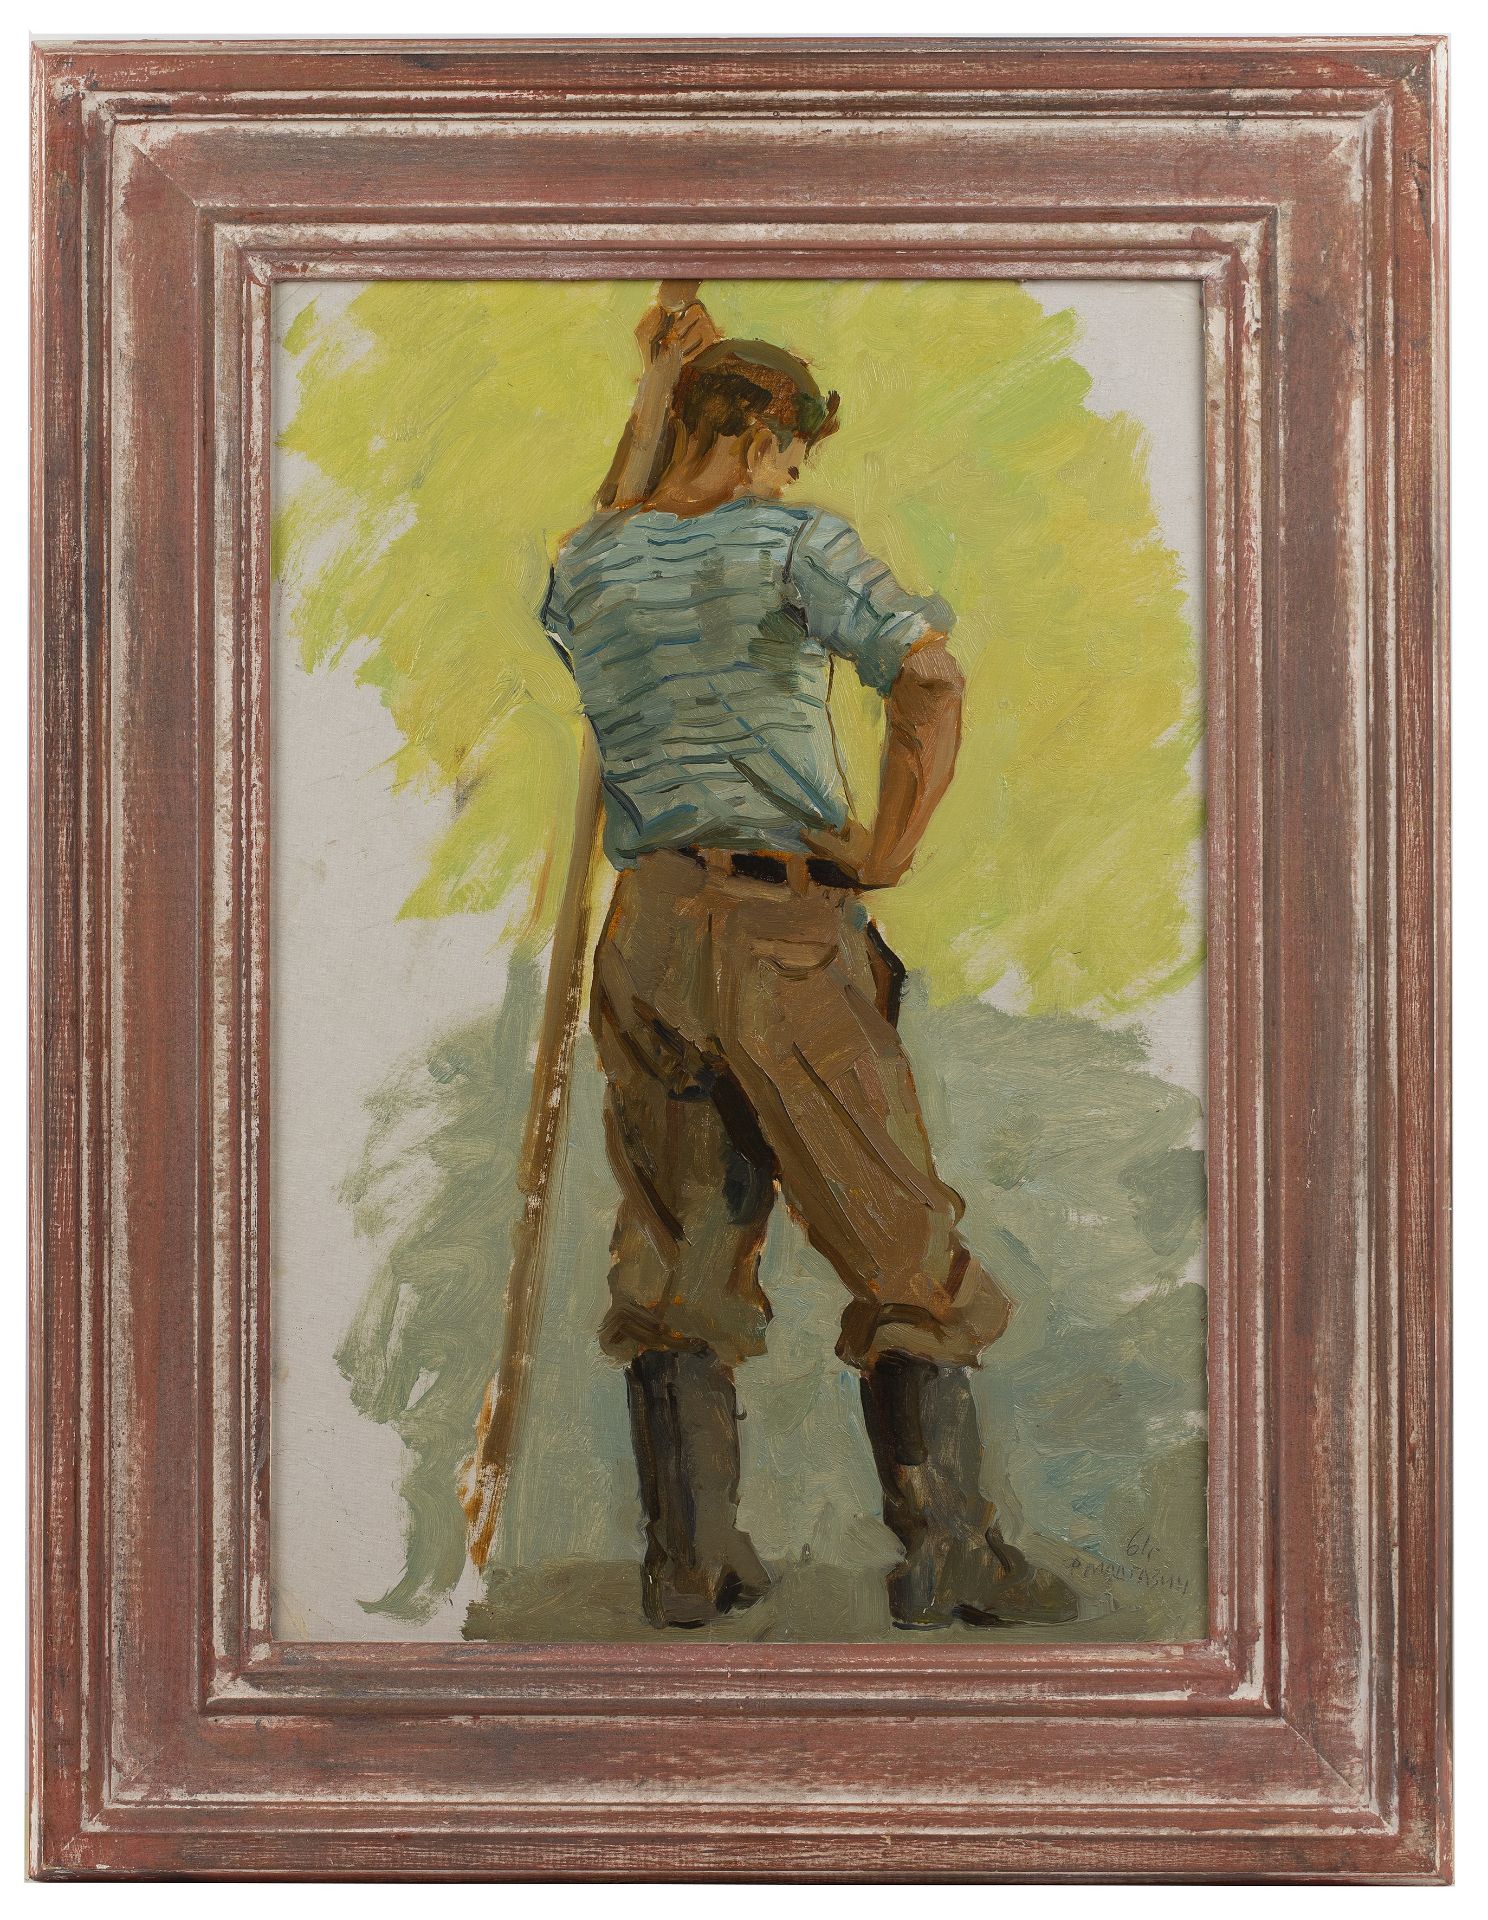 20th Century School 'Study of a farmer', oil on board, indistinctly signed and dated lower right, - Image 2 of 3